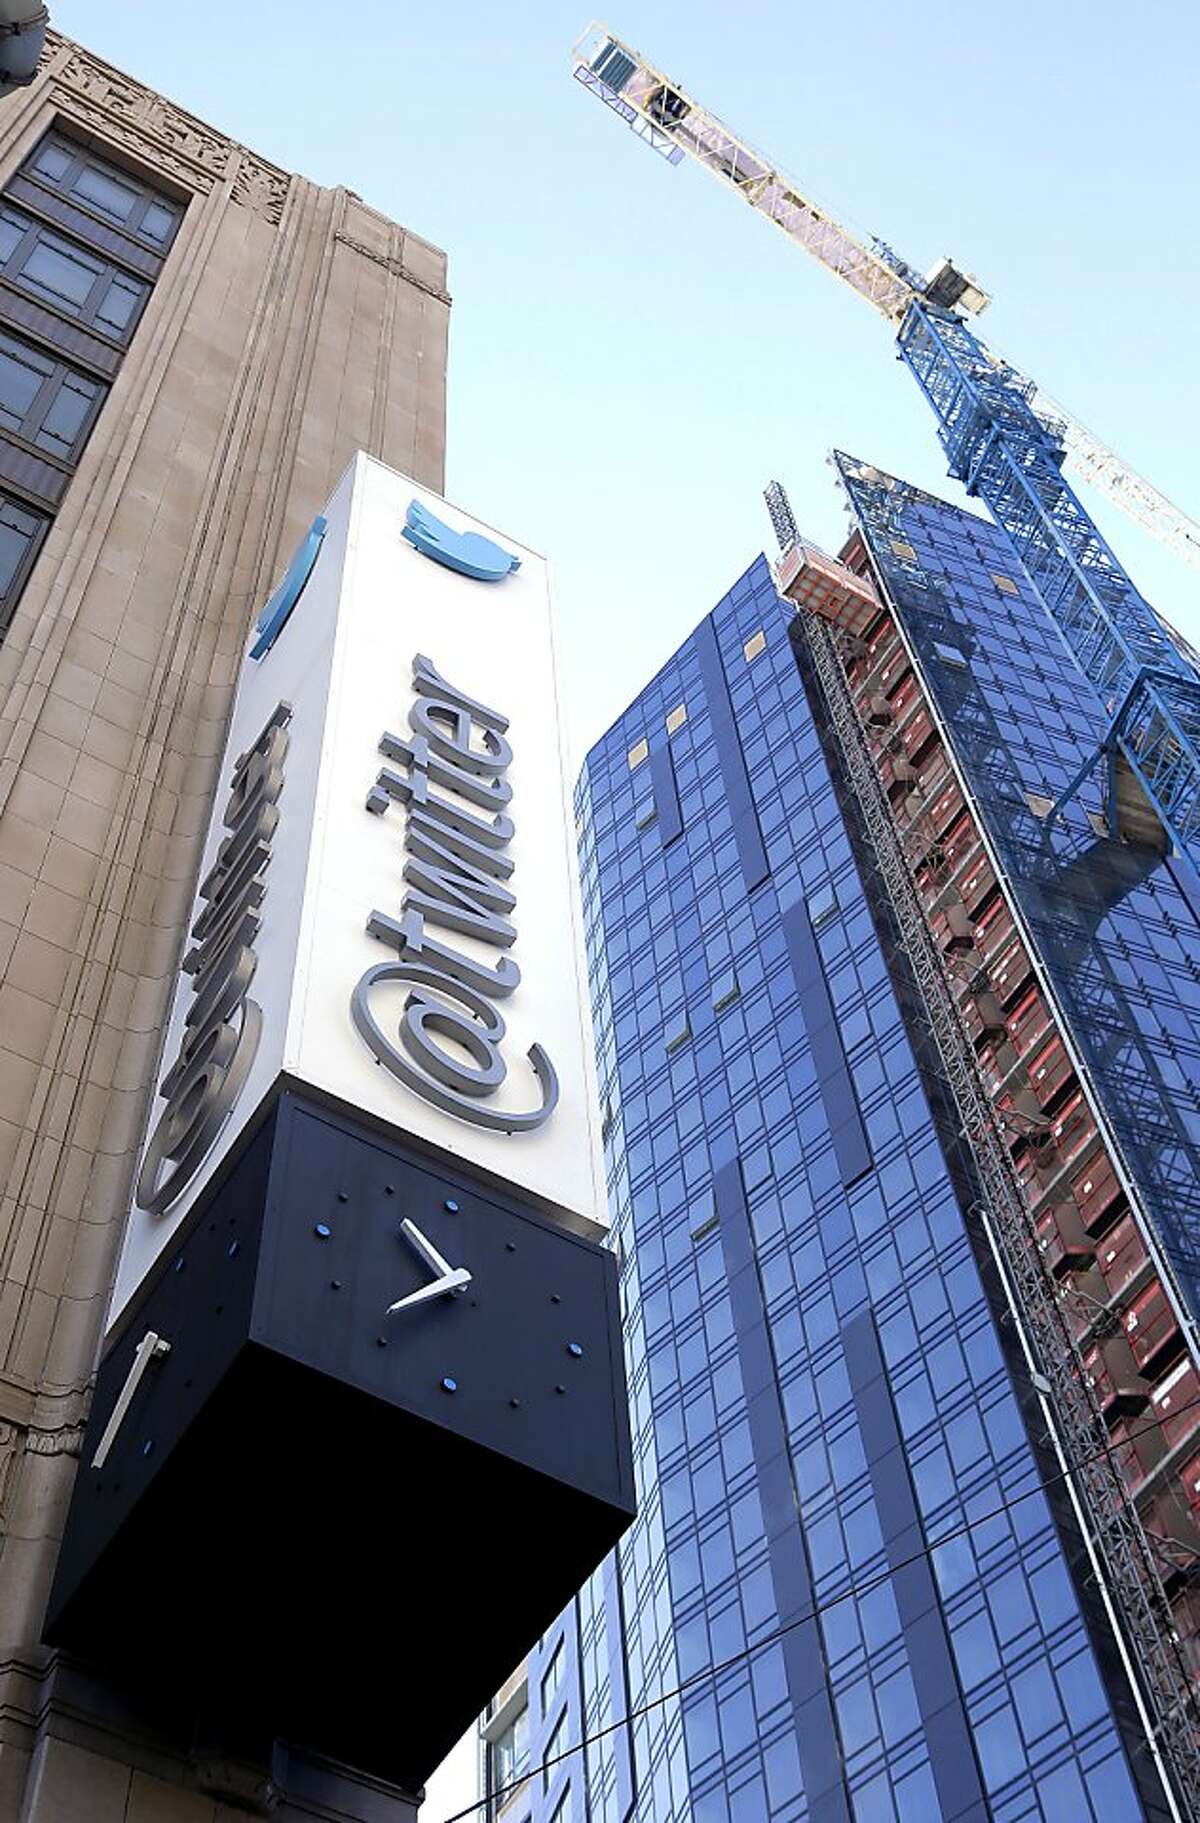 This photo shows the sign outside of Twitter headquarters in San Francisco, Monday, Nov. 4, 2013. As Twitter prepares to complete its initial public offering of stock this week, the San Francisco company's history of losses totaling nearly $500 million is raising questions about its ability to turn a cultural phenomenon into a sustainable business. (AP Photo/Jeff Chiu)